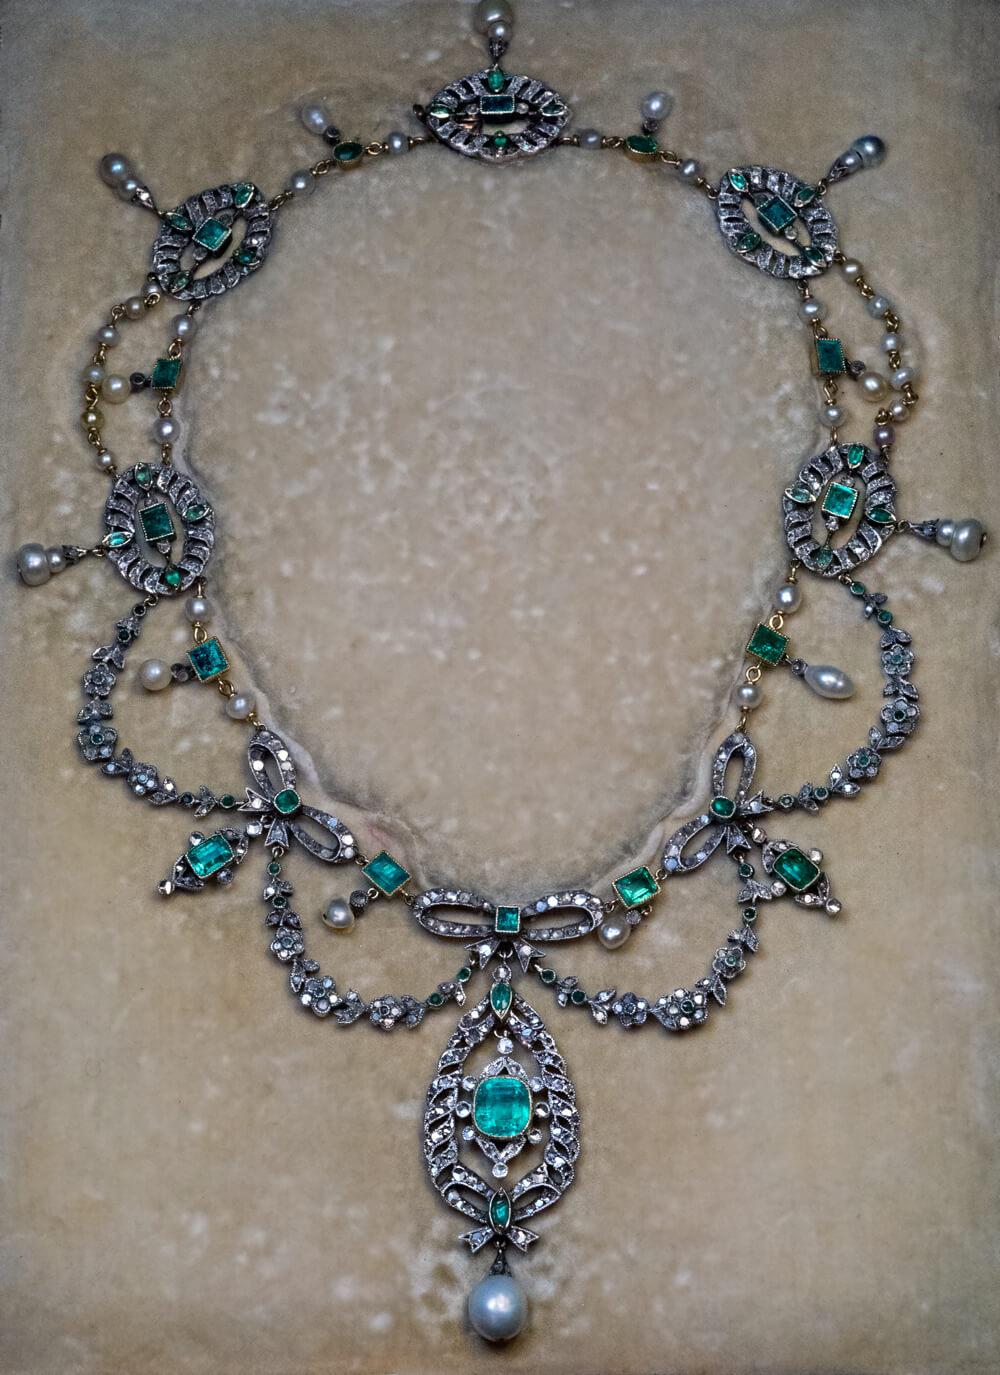 Circa 1905
The necklace is designed in the Garland style, which was fashionable in the early 1900s. It is crafted in silver-topped 18K gold (front – silver, back – gold) and embellished with emeralds, pearls, and rose cut diamonds.
The principal